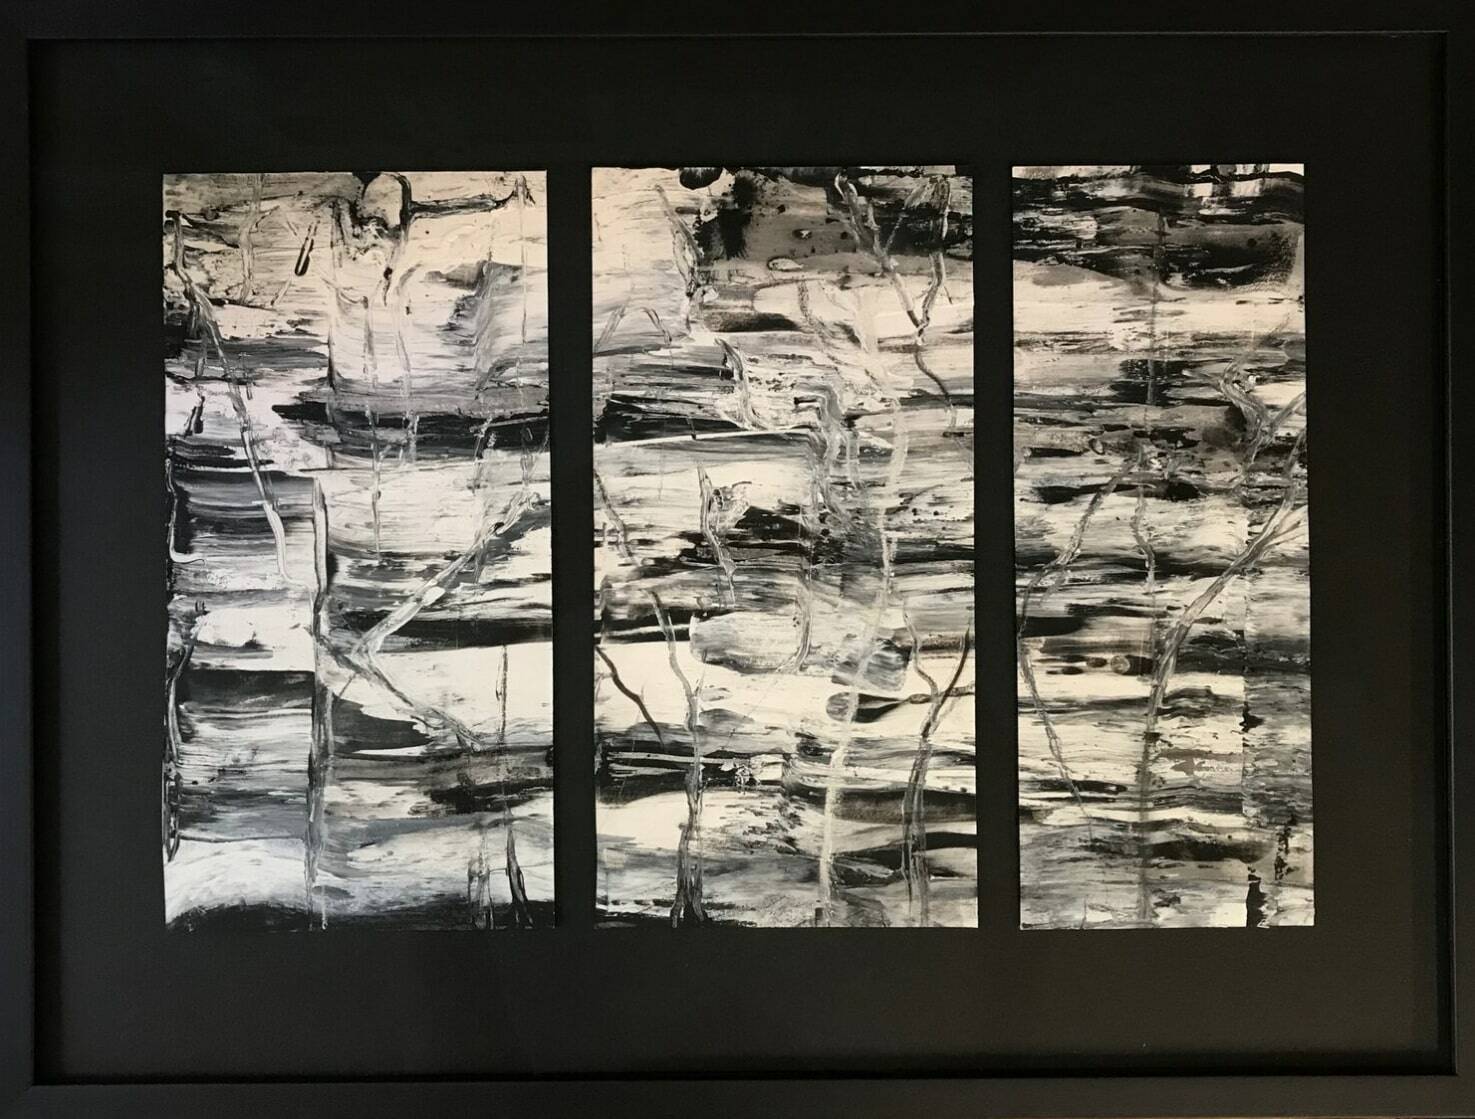 Contributed photo by Alchemy Art Center
Black and White Landscape by Marsha McAllister